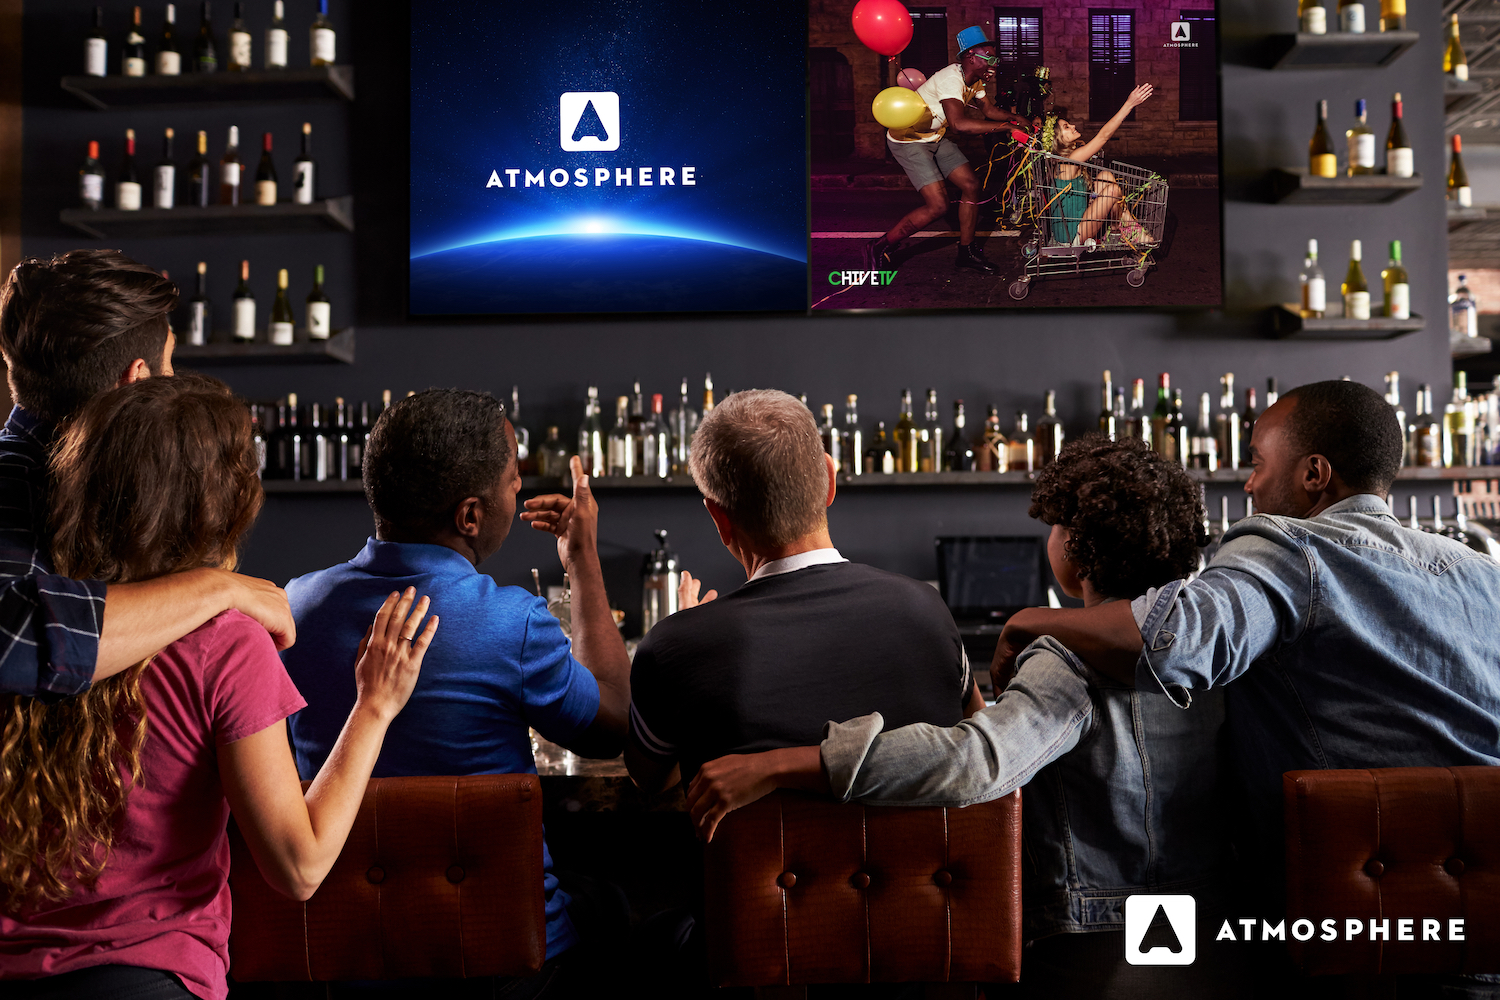 Bar patrons watch Atmosphere programming on a television.